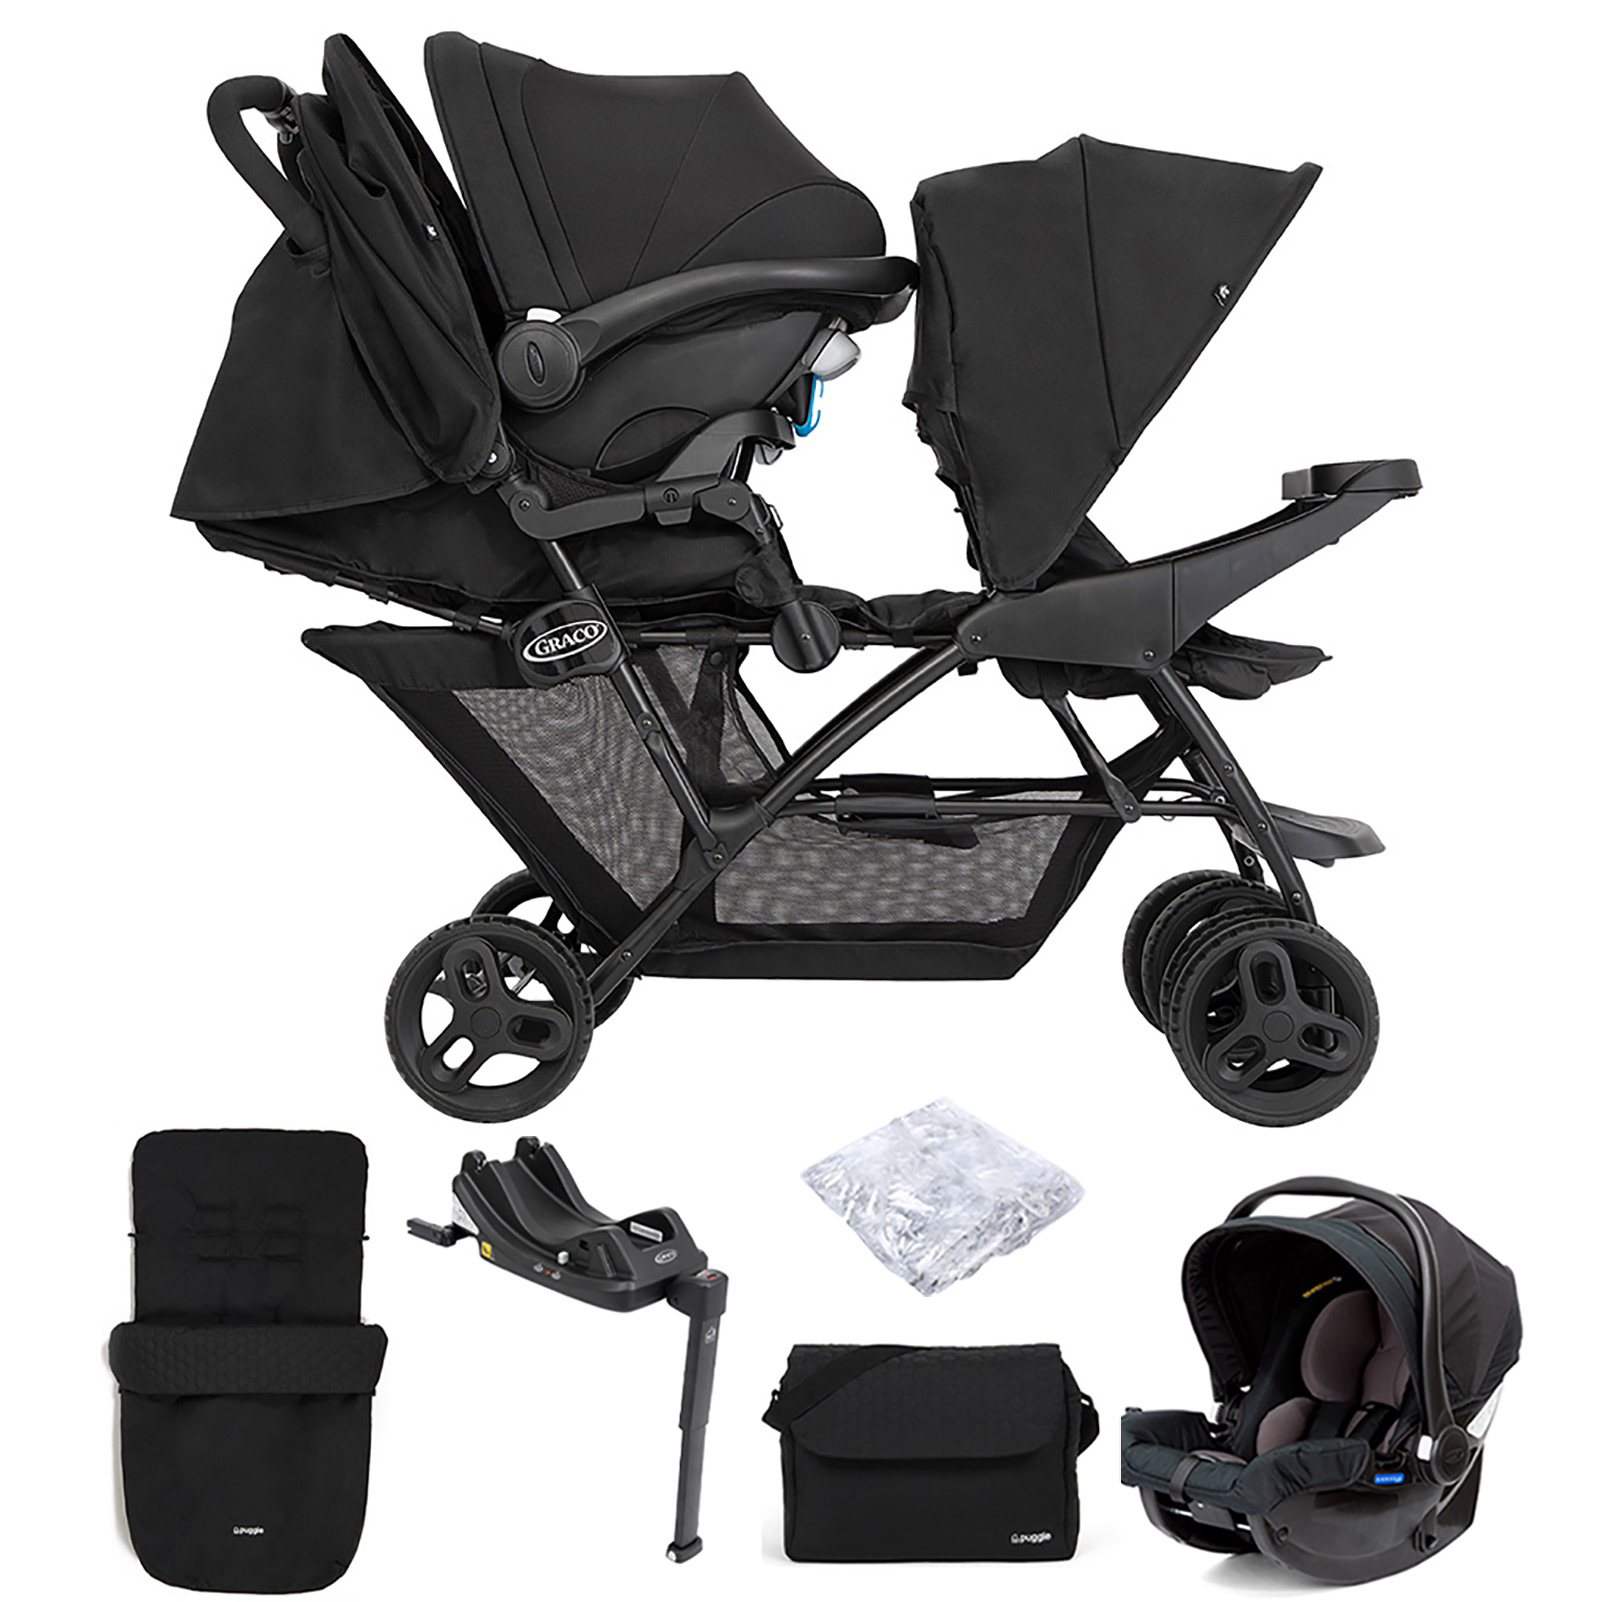 Graco Blaaze™ Stadium Duo Tandem Travel System with Front Apron, Raincover, Footmuff, Changing Bag, Car Seat & Base - Night Sky